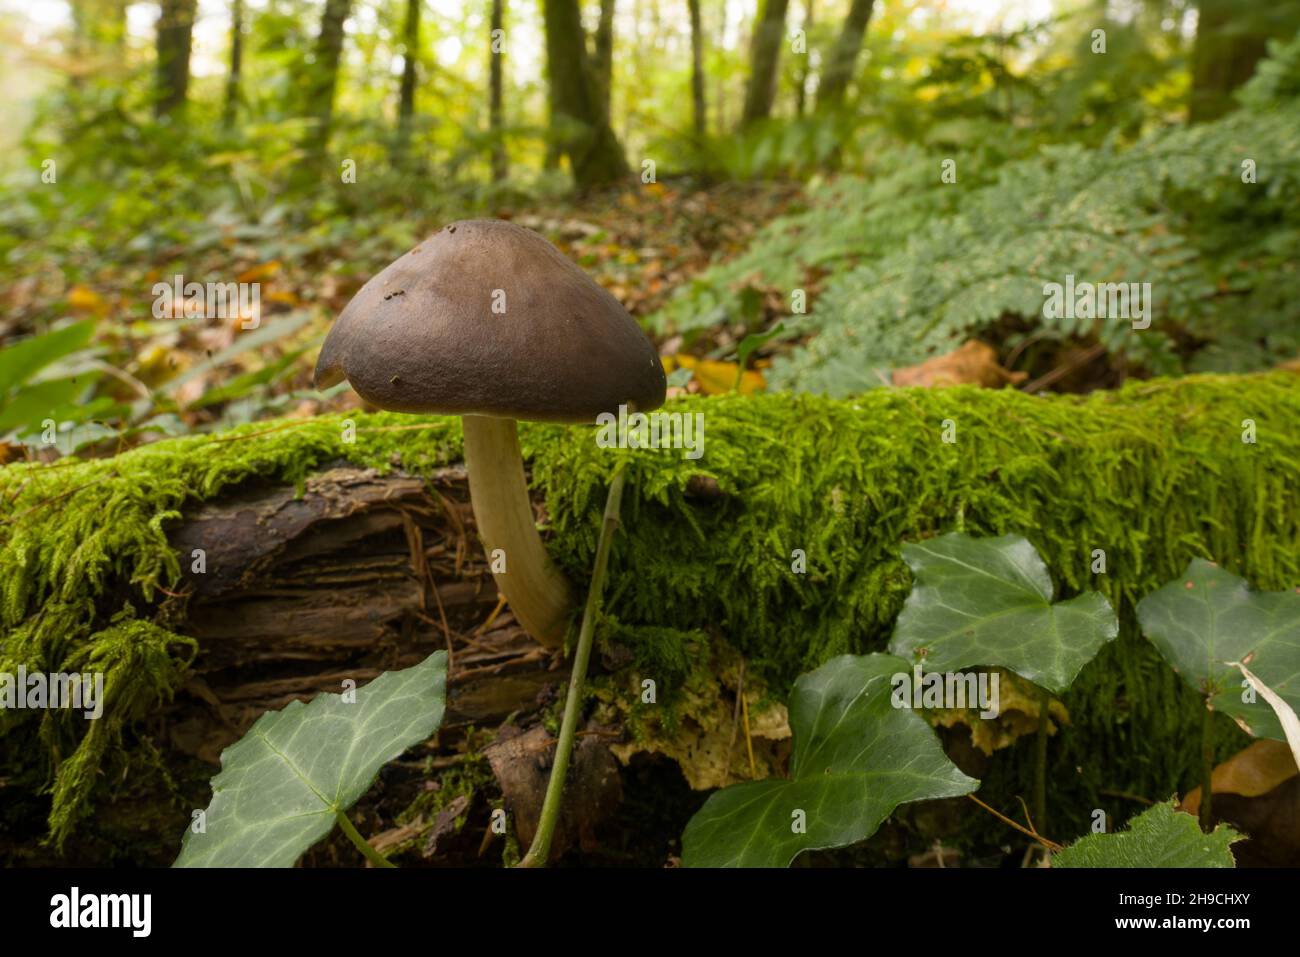 A Deer Shield (Pluteus cervinus) mushroom, also known as Deer Mushroom and Fawn Mushroom, growing on a rotting log in woodland in the Quantock Hills, Somerset, England. Stock Photo